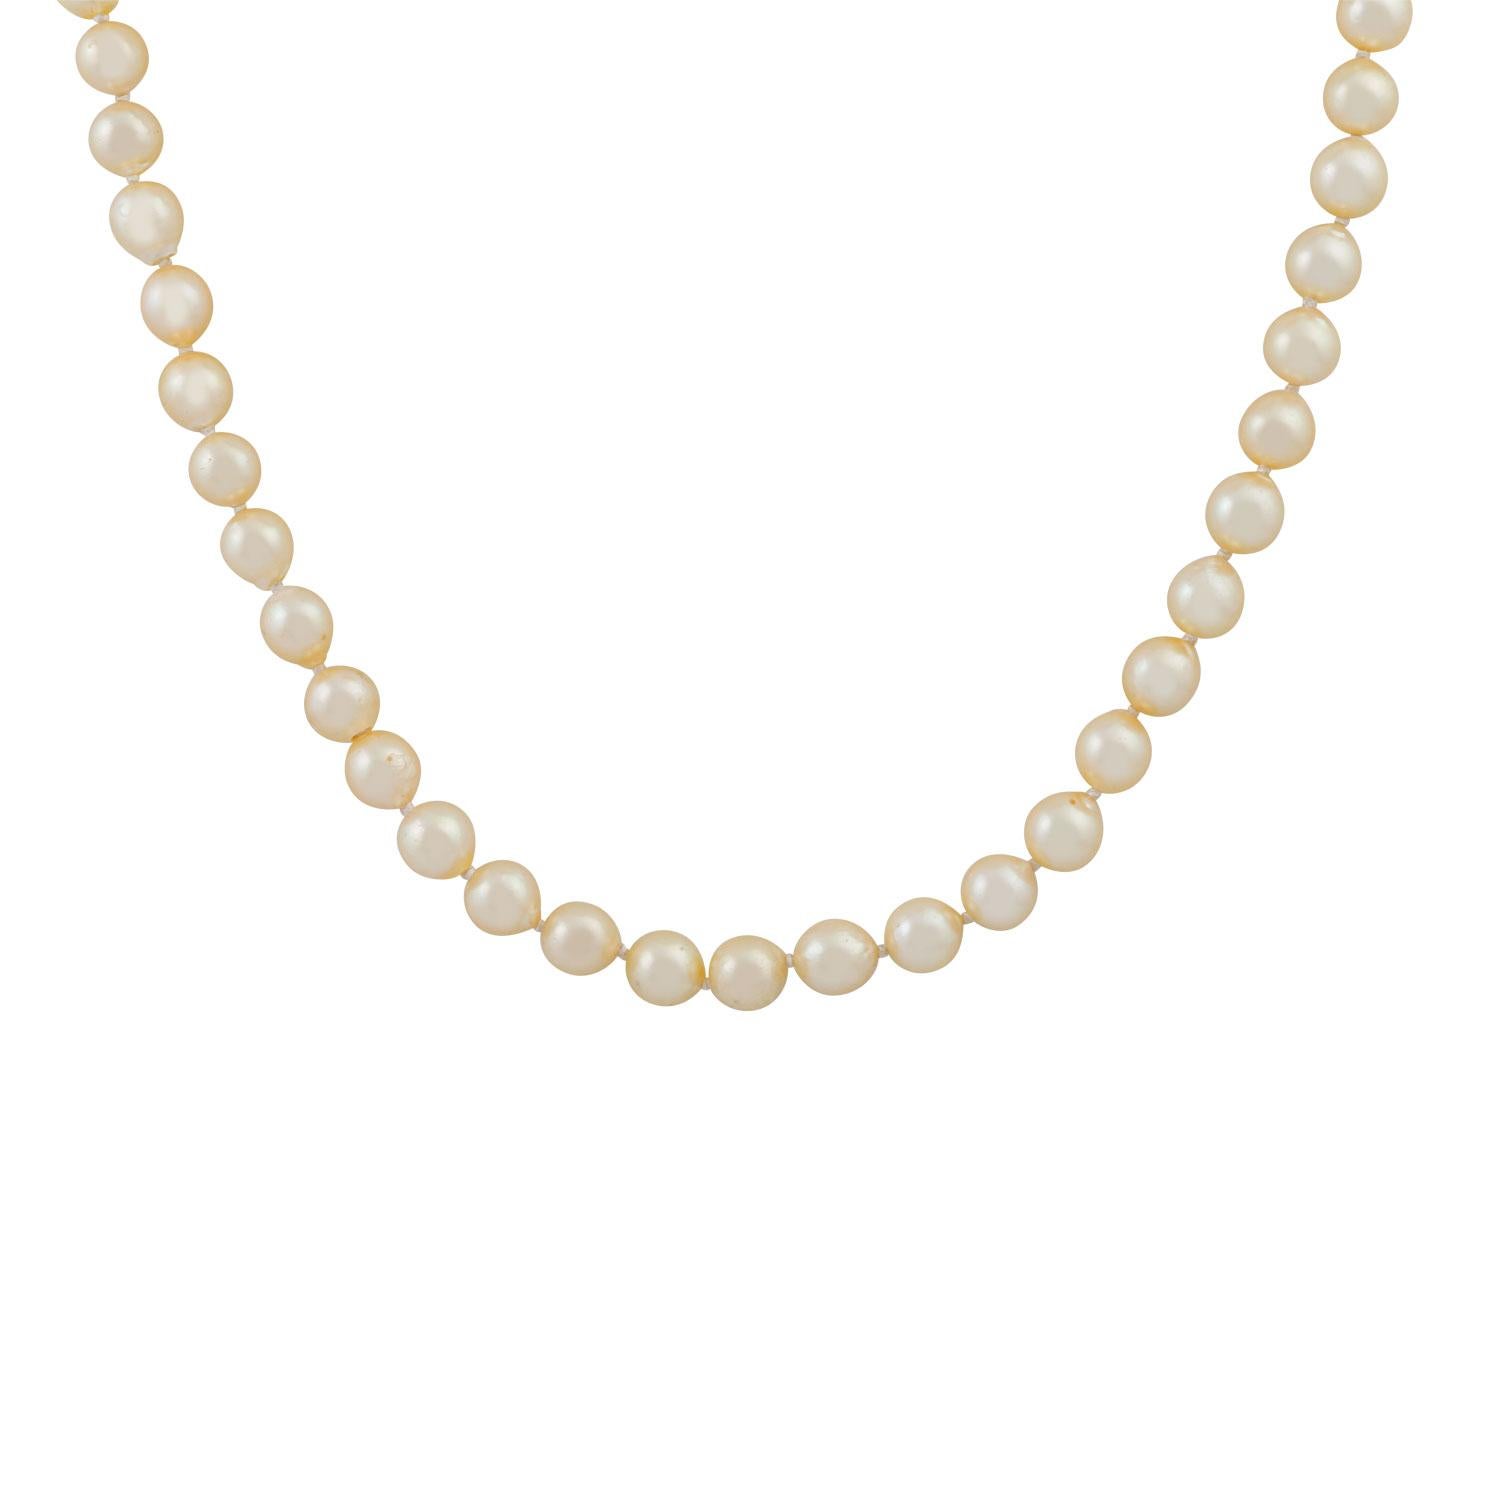 champagne-colored Akoya cultured pearls partially with WMM, gold-colored clasp, 52.1 g, L: 91.5 cm, late 20th century, slight signs of wear! (3)

 Pearl necklace, champagne Akoya cultured pearls partially with growth marks, gold colored clasp, 52.1